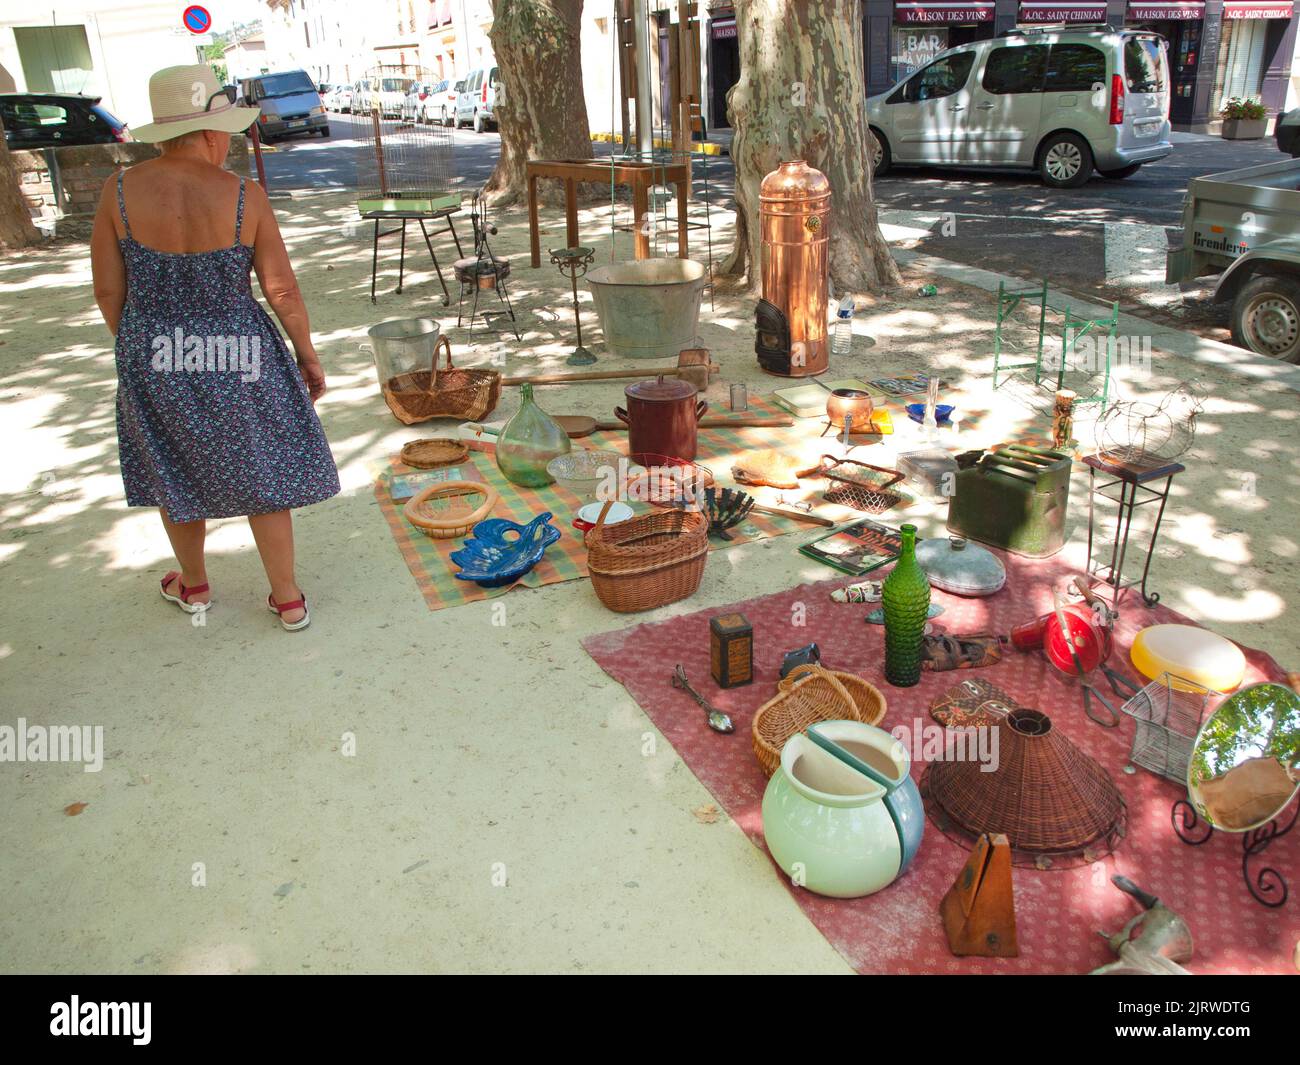 A shopper at the market in Saint-Chinian, Languedoc-Rousillon, France Stock Photo